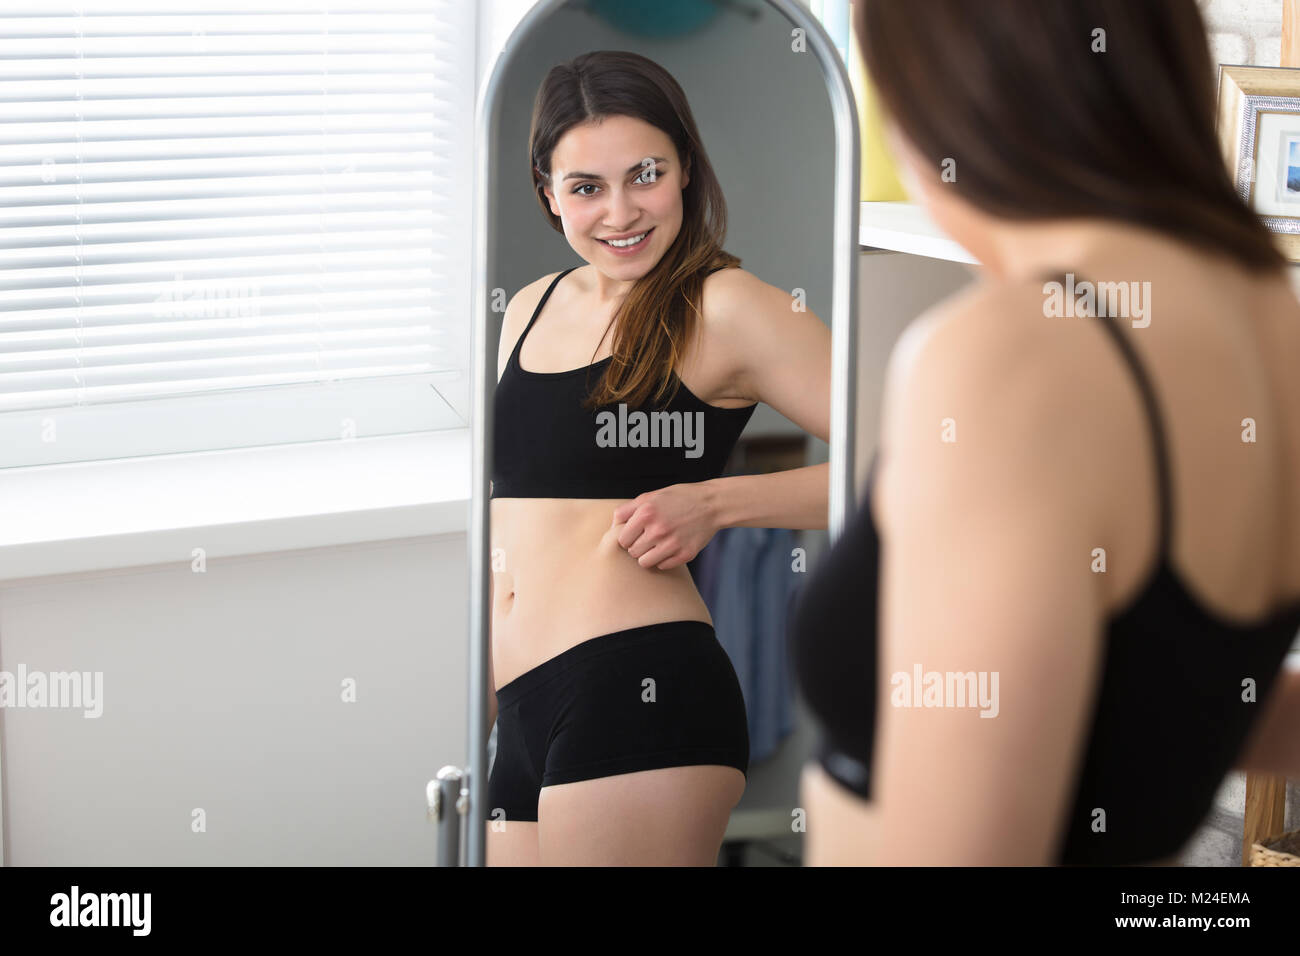 Young Woman Looking At Herself In The Mirror And Pinching Her Stomach Fat Stock Photo